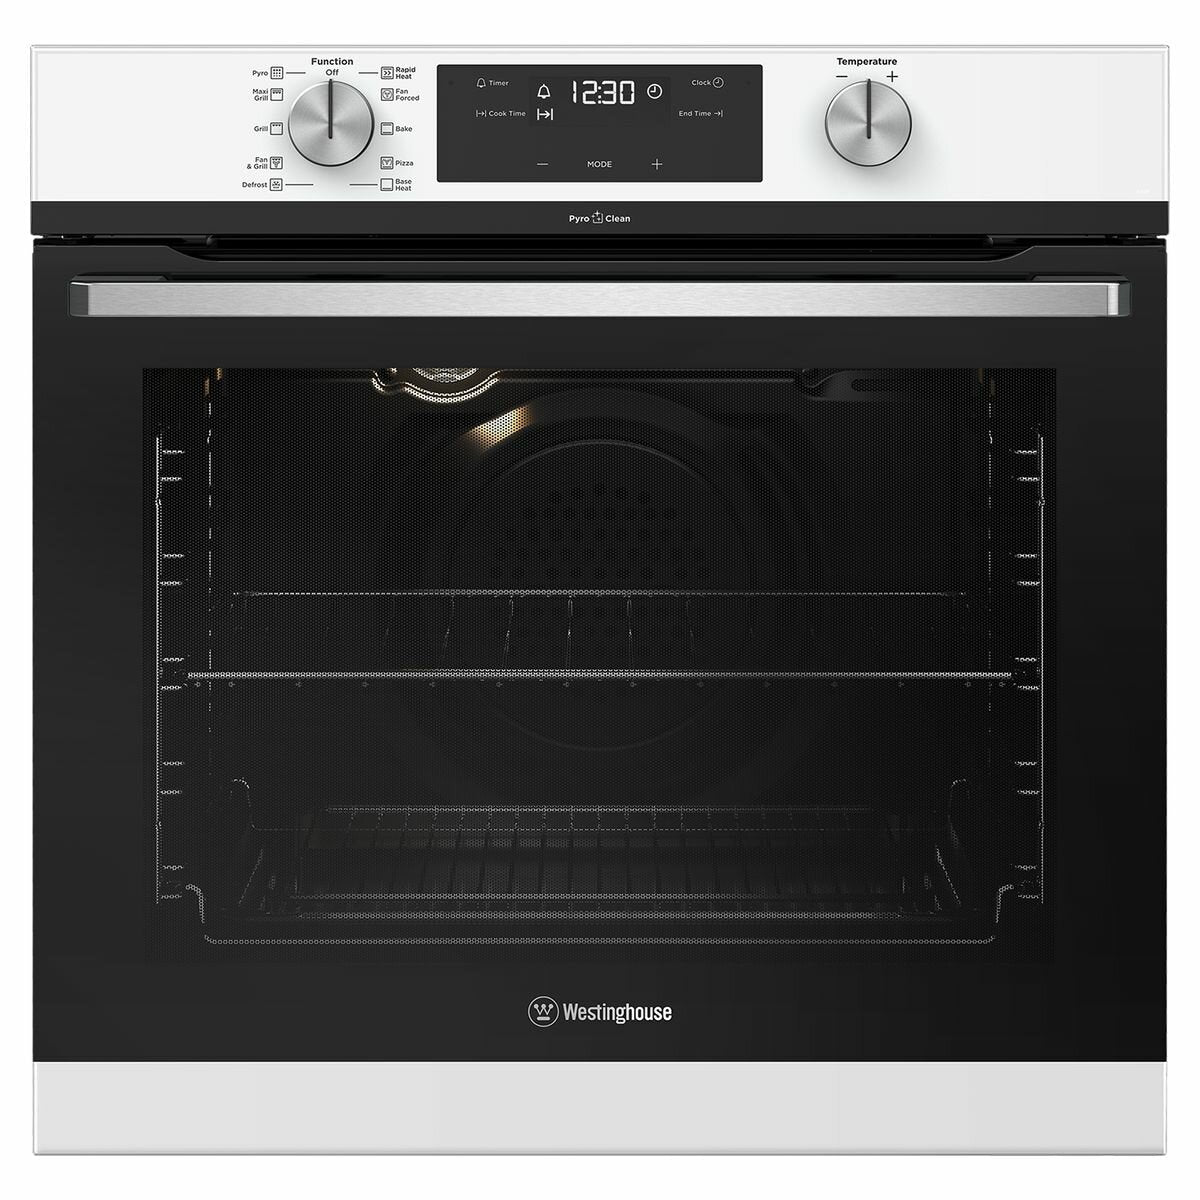 Westinghouse 60cm Pyrolytic Built-In Oven Model WVEP615WC